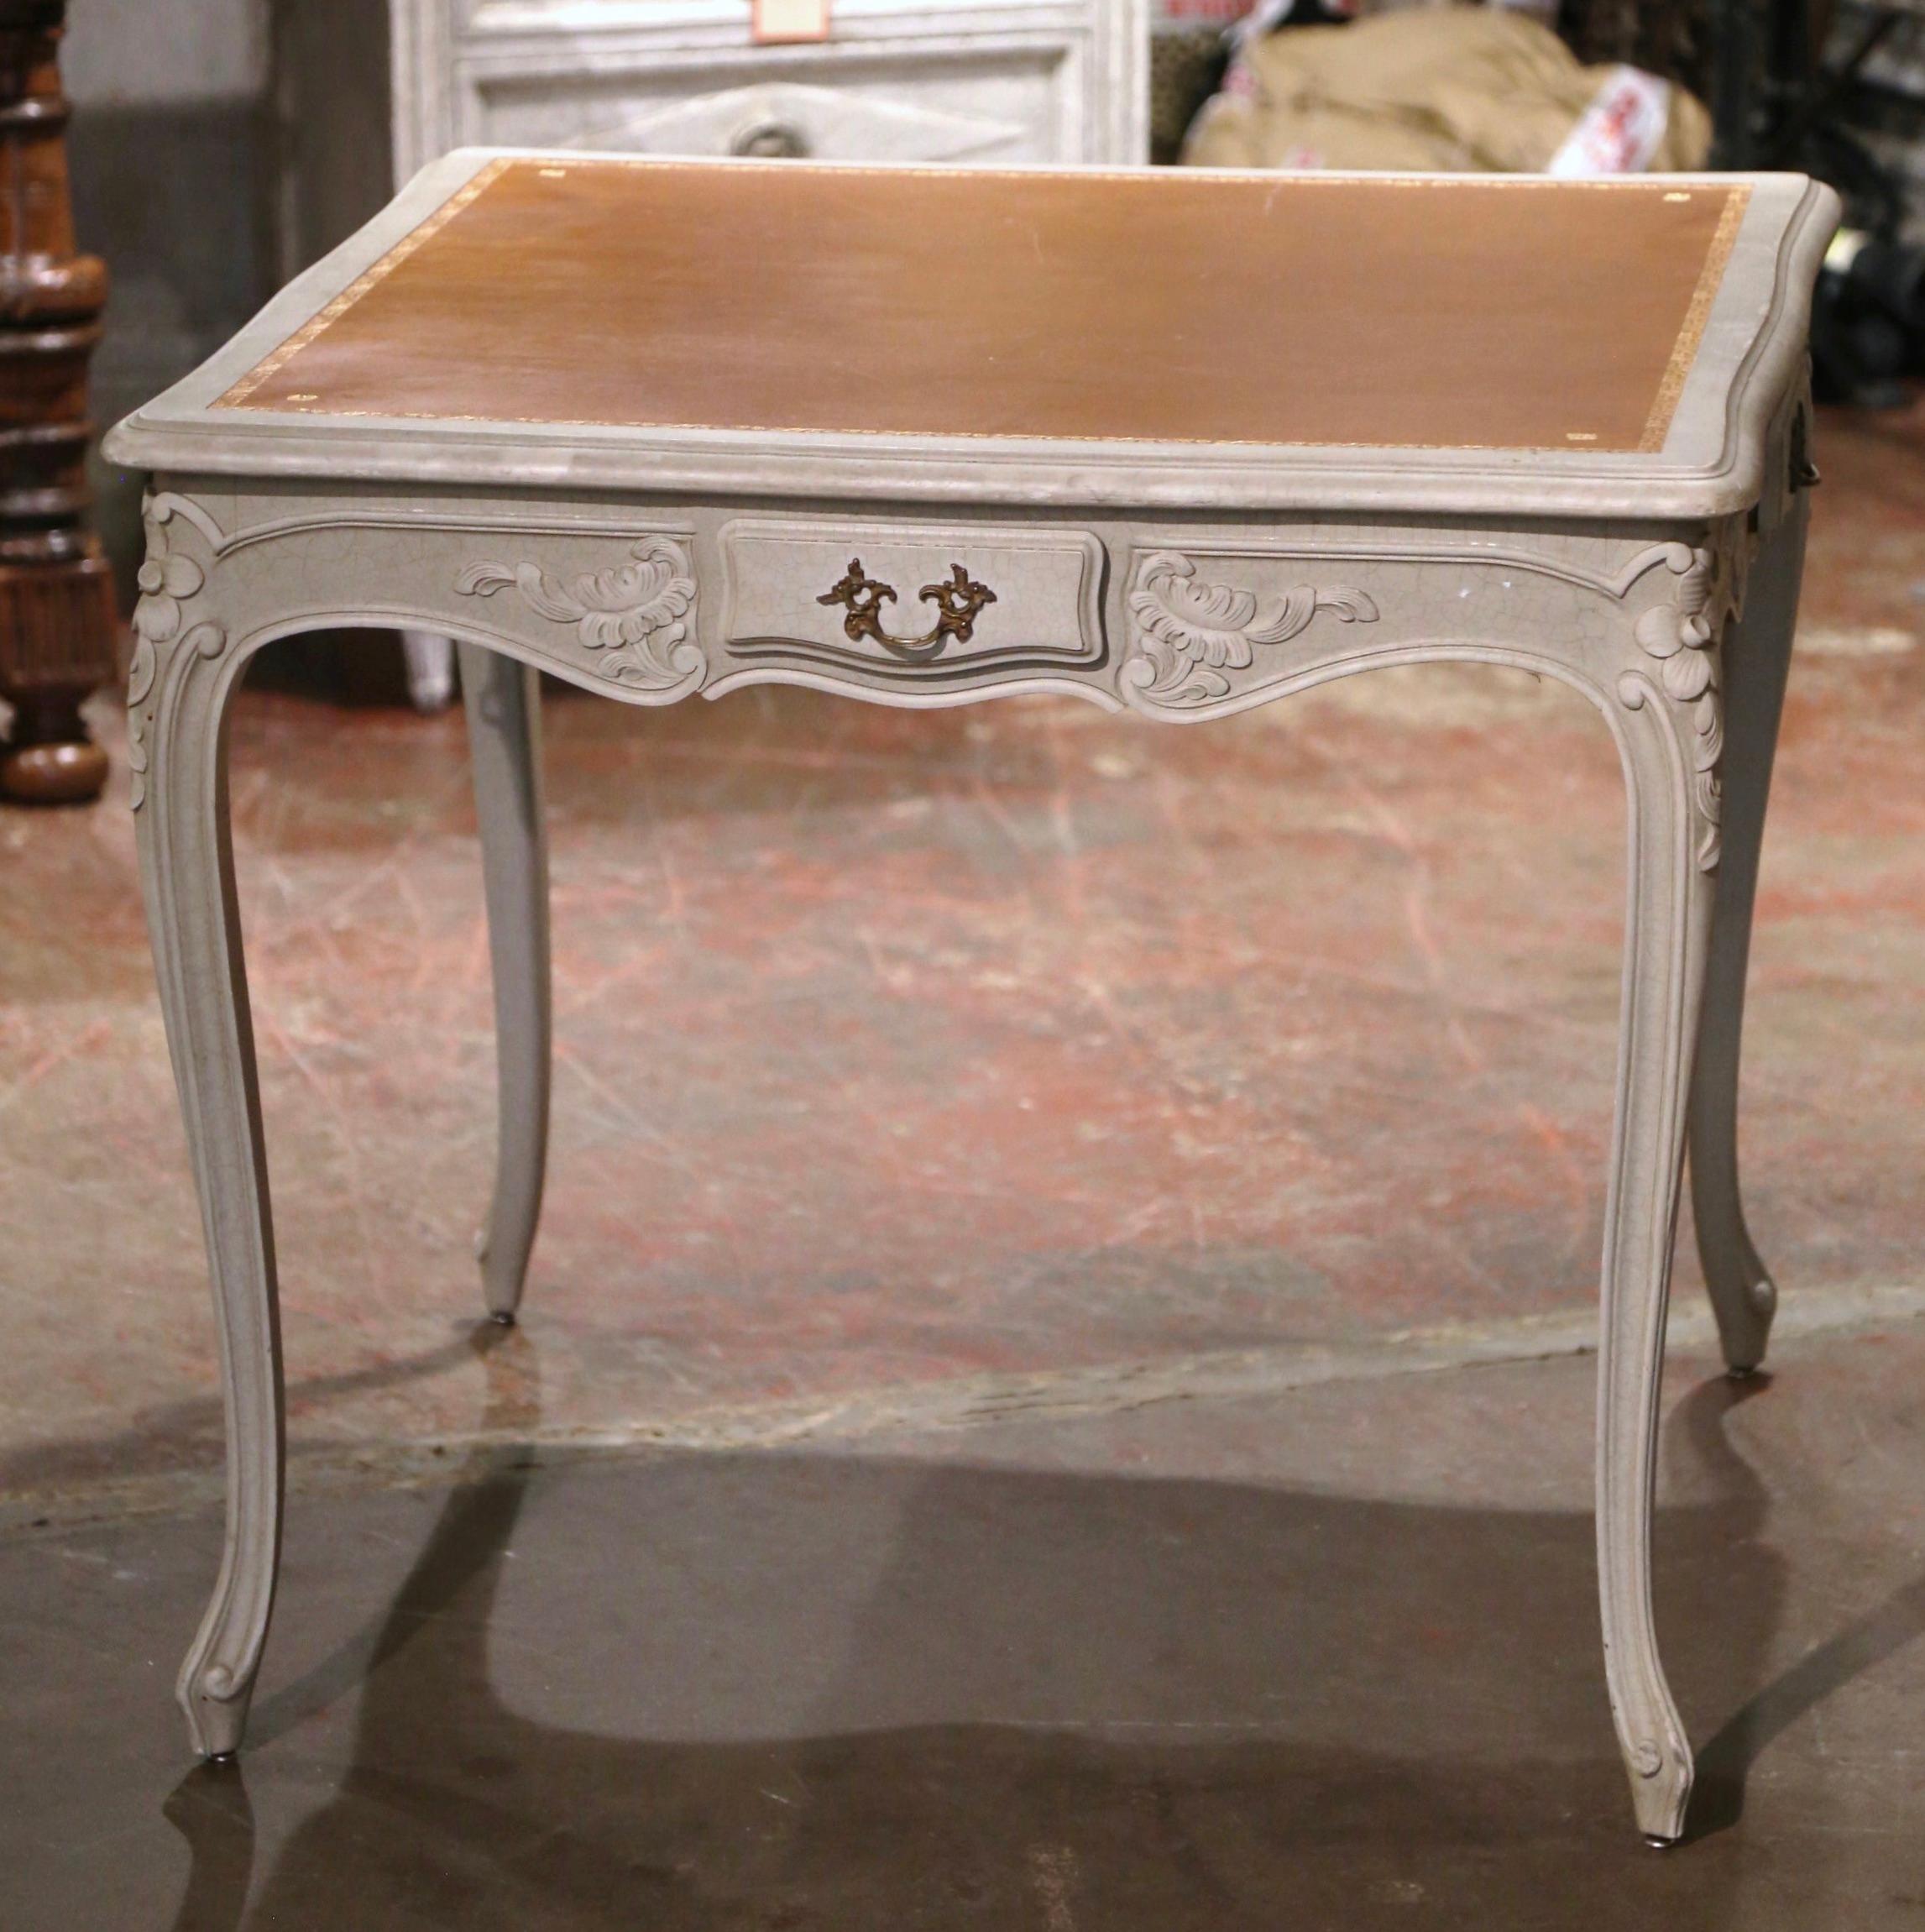 Crafted in France circa 1960 and square in shape, the table stands on cabriole legs decorated with floral and acanthus leaf motifs at the shoulders over scroll feet at the base. The table with a scalloped apron is decorated with carved floral and